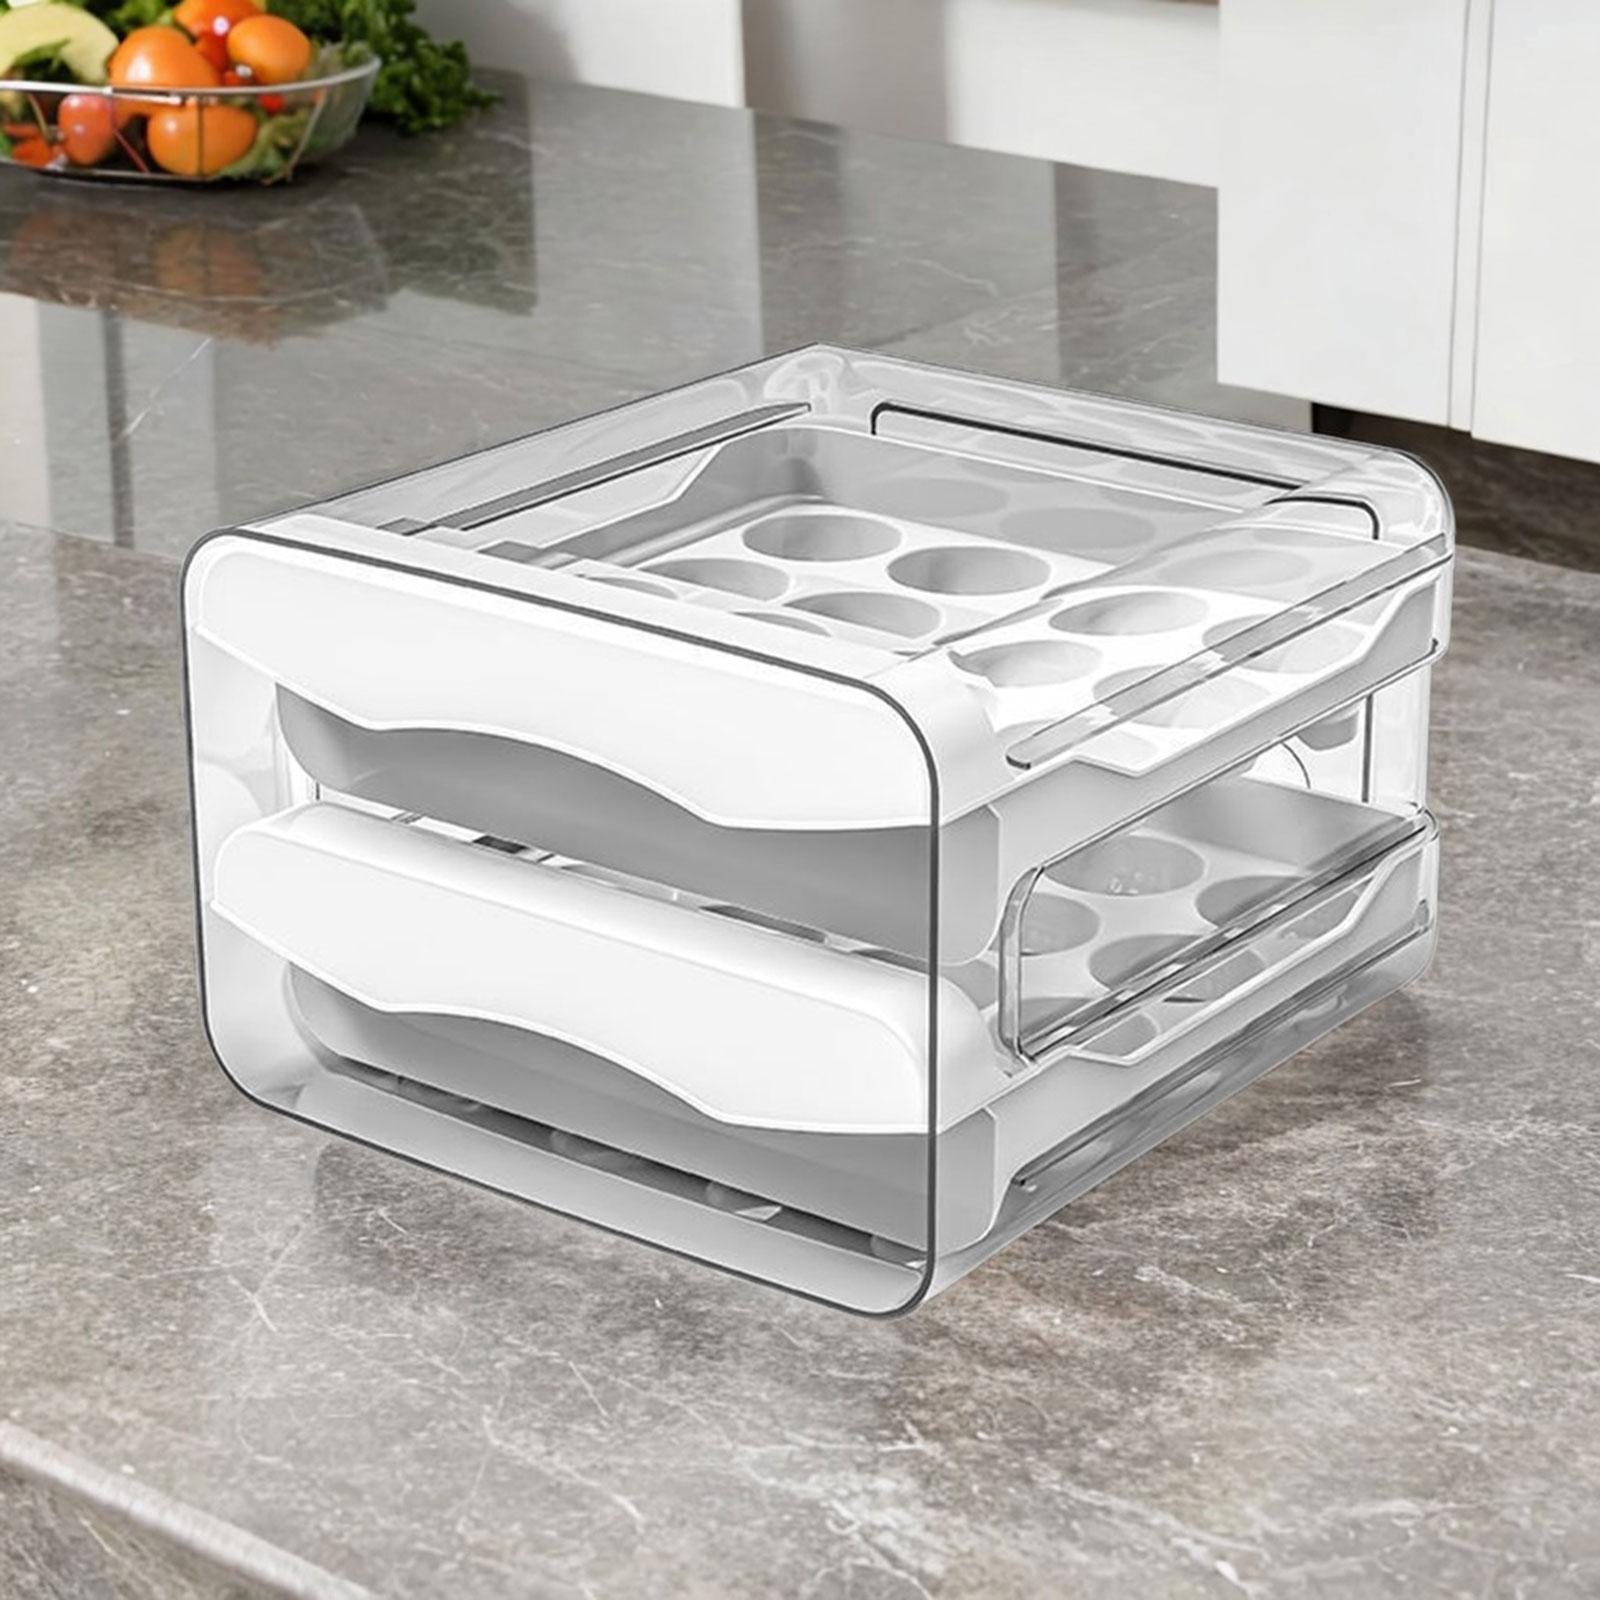 Egg Holder for Fridge Egg Fresh Storage Box Space Saving Large Capacity 2 Layers Egg Tray Egg Storage Container for for Kitchen Refrigerator